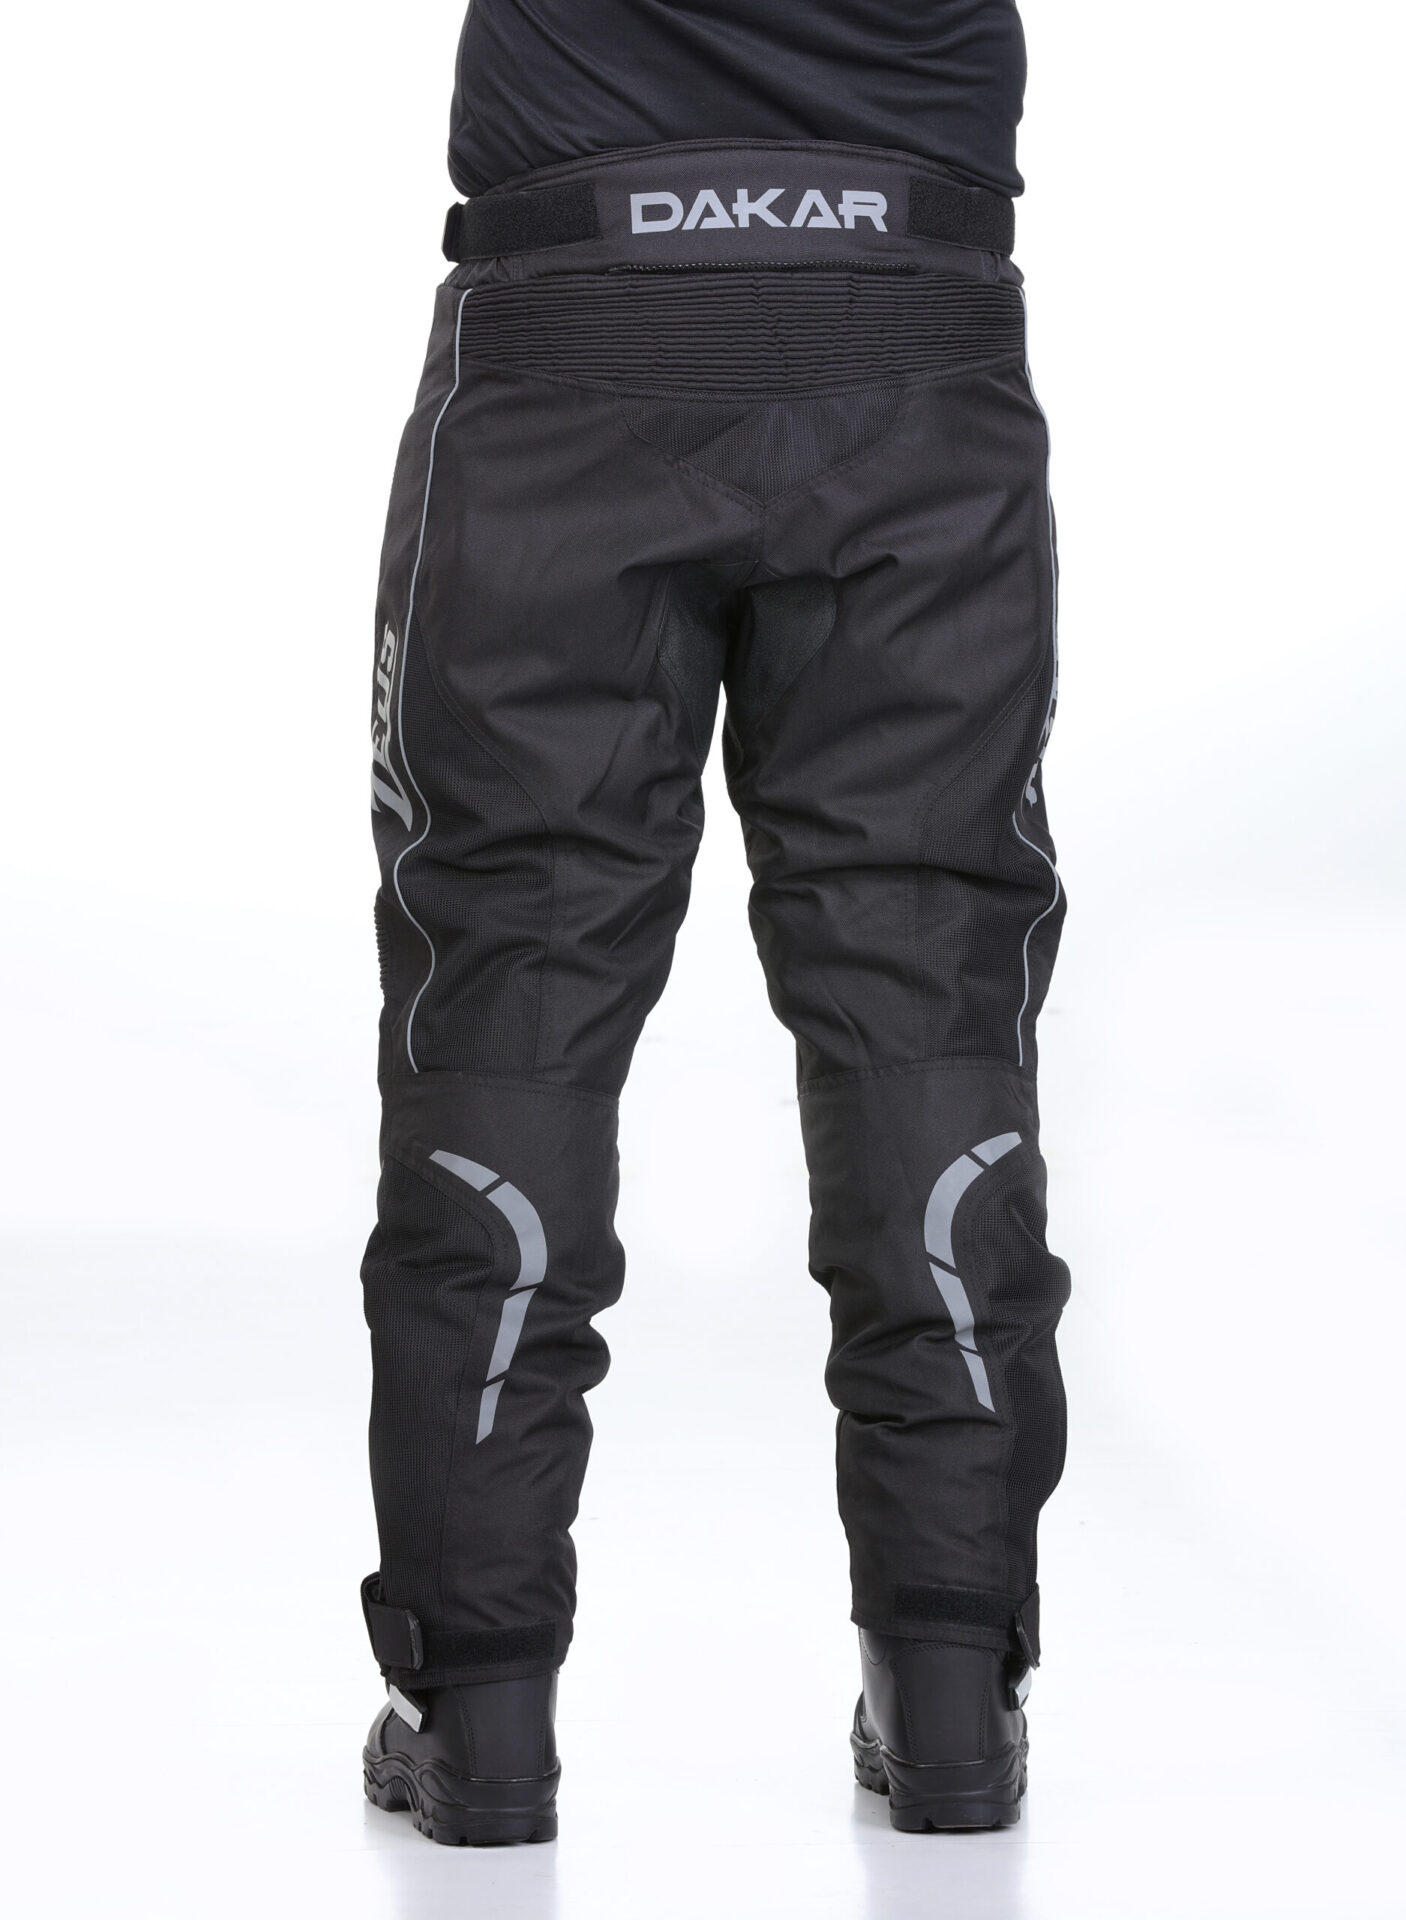 Mens Motorcycle Cargo Pants With Side Pockets On Sale - Rugged Motorbike  Jeans